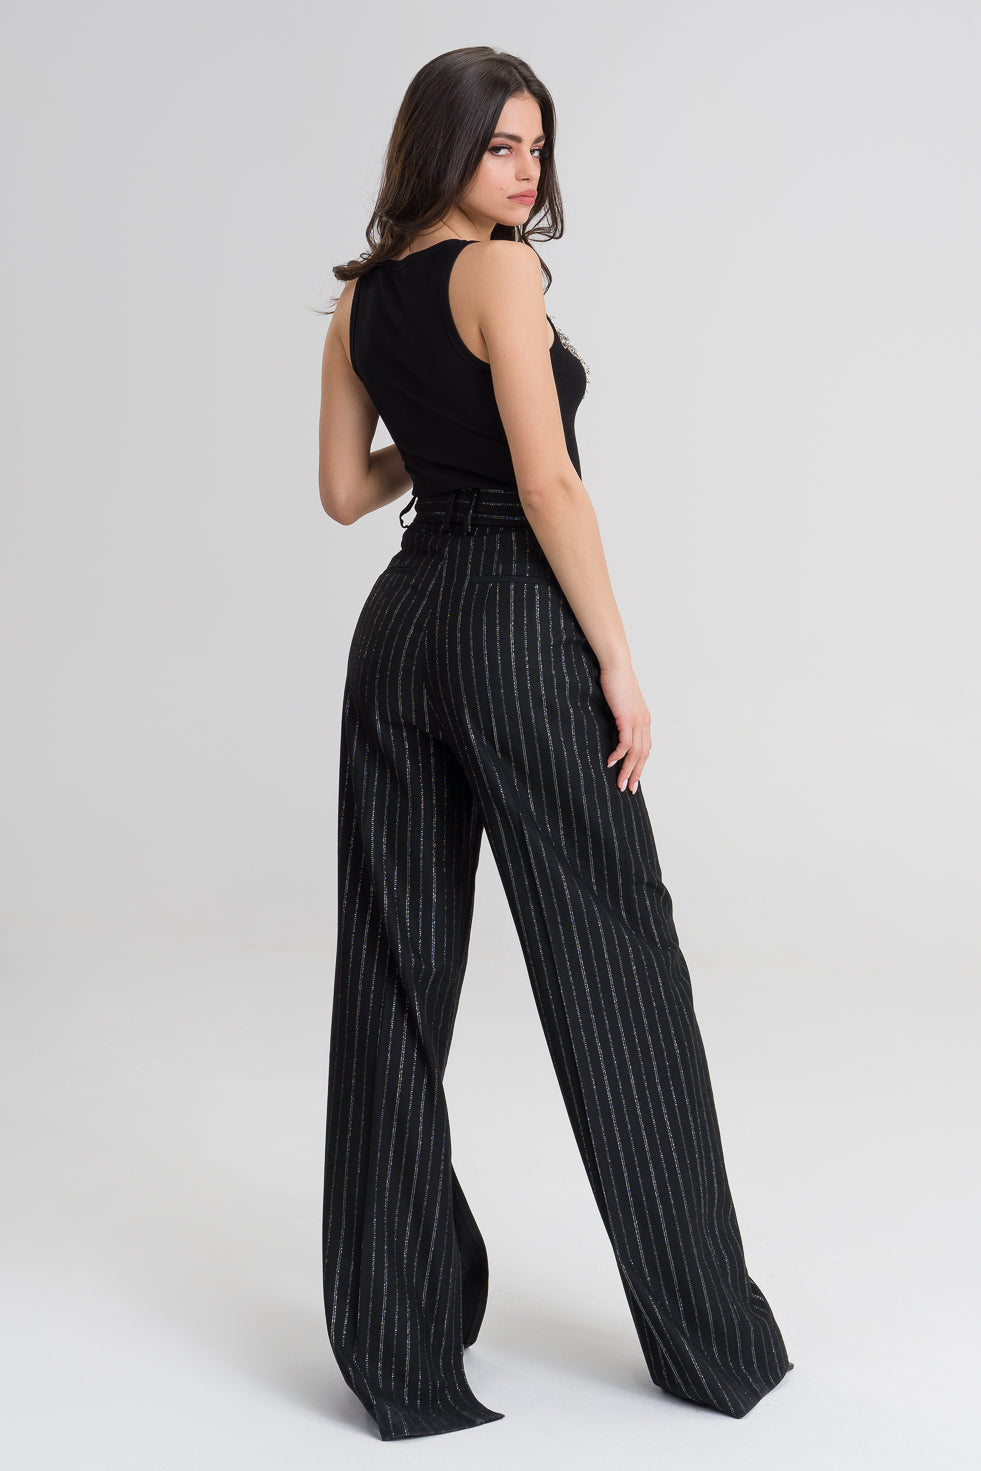 Madelyn  Black Cotton structured suit metallic pants